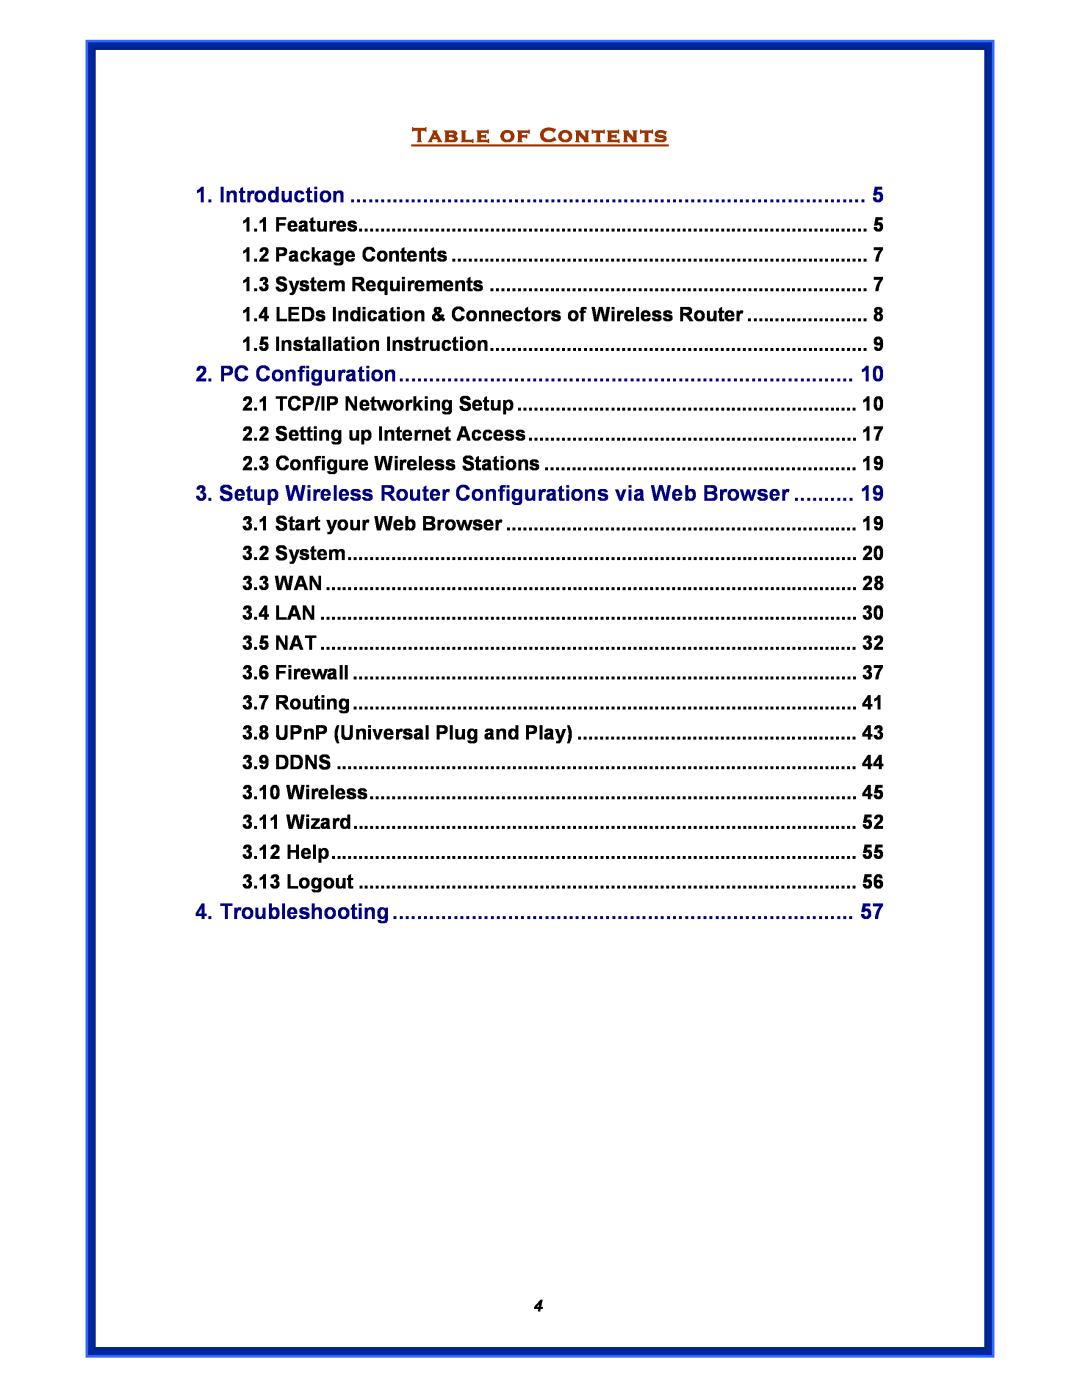 Advantek Networks AWR-MIMO-54RA user manual Table of Contents, Introduction, PC Configuration, Troubleshooting 